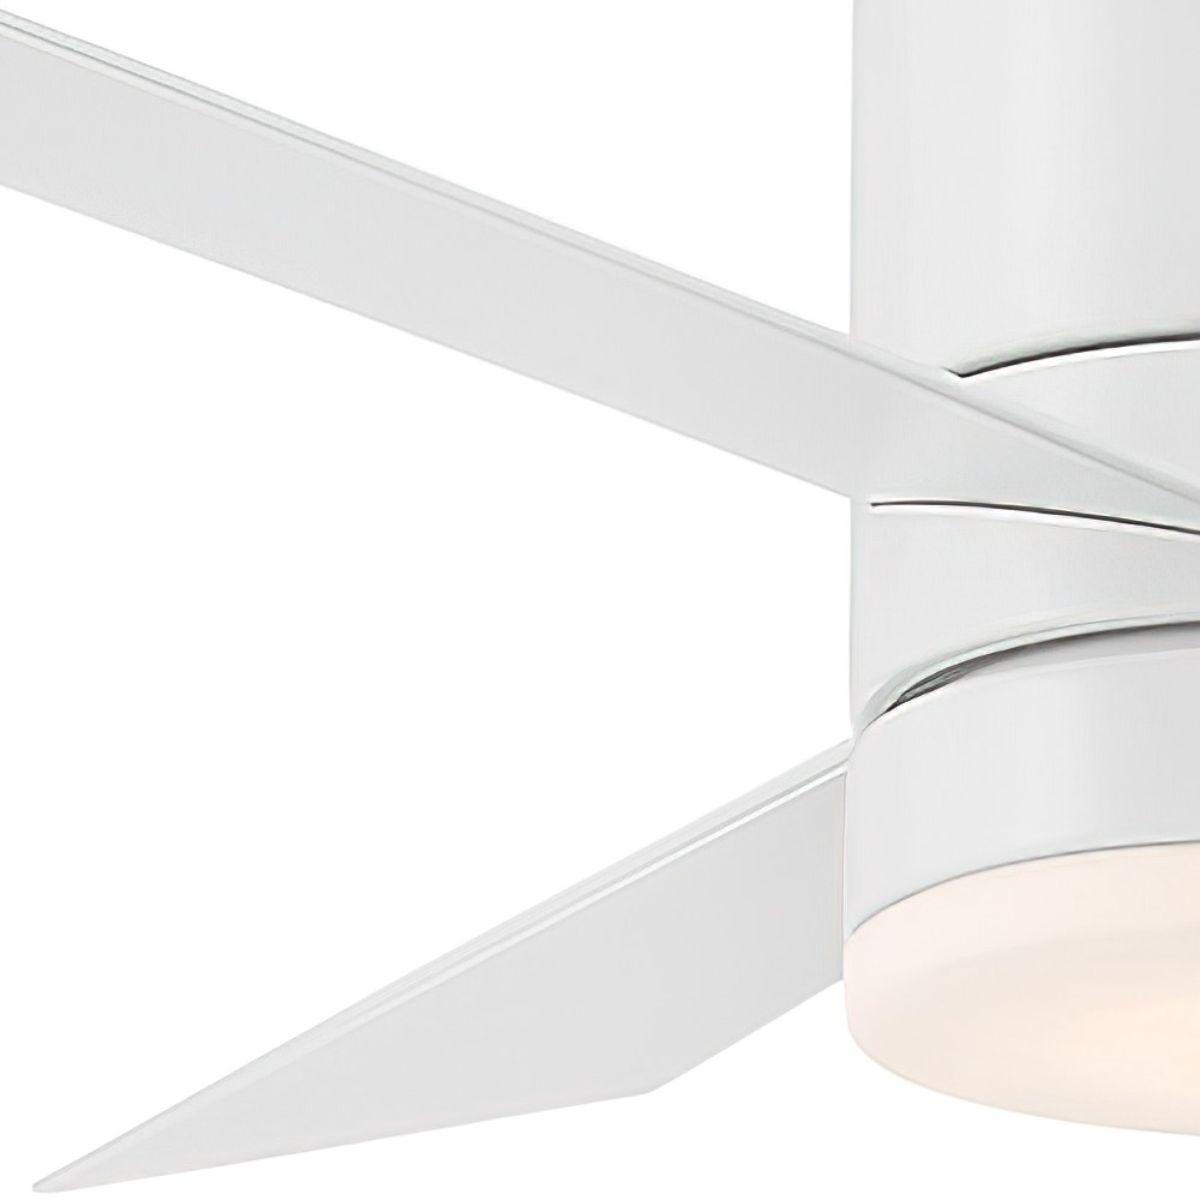 Axis 44 Inch Propeller Outdoor Smart Ceiling Fan With 2700K LED And Remote